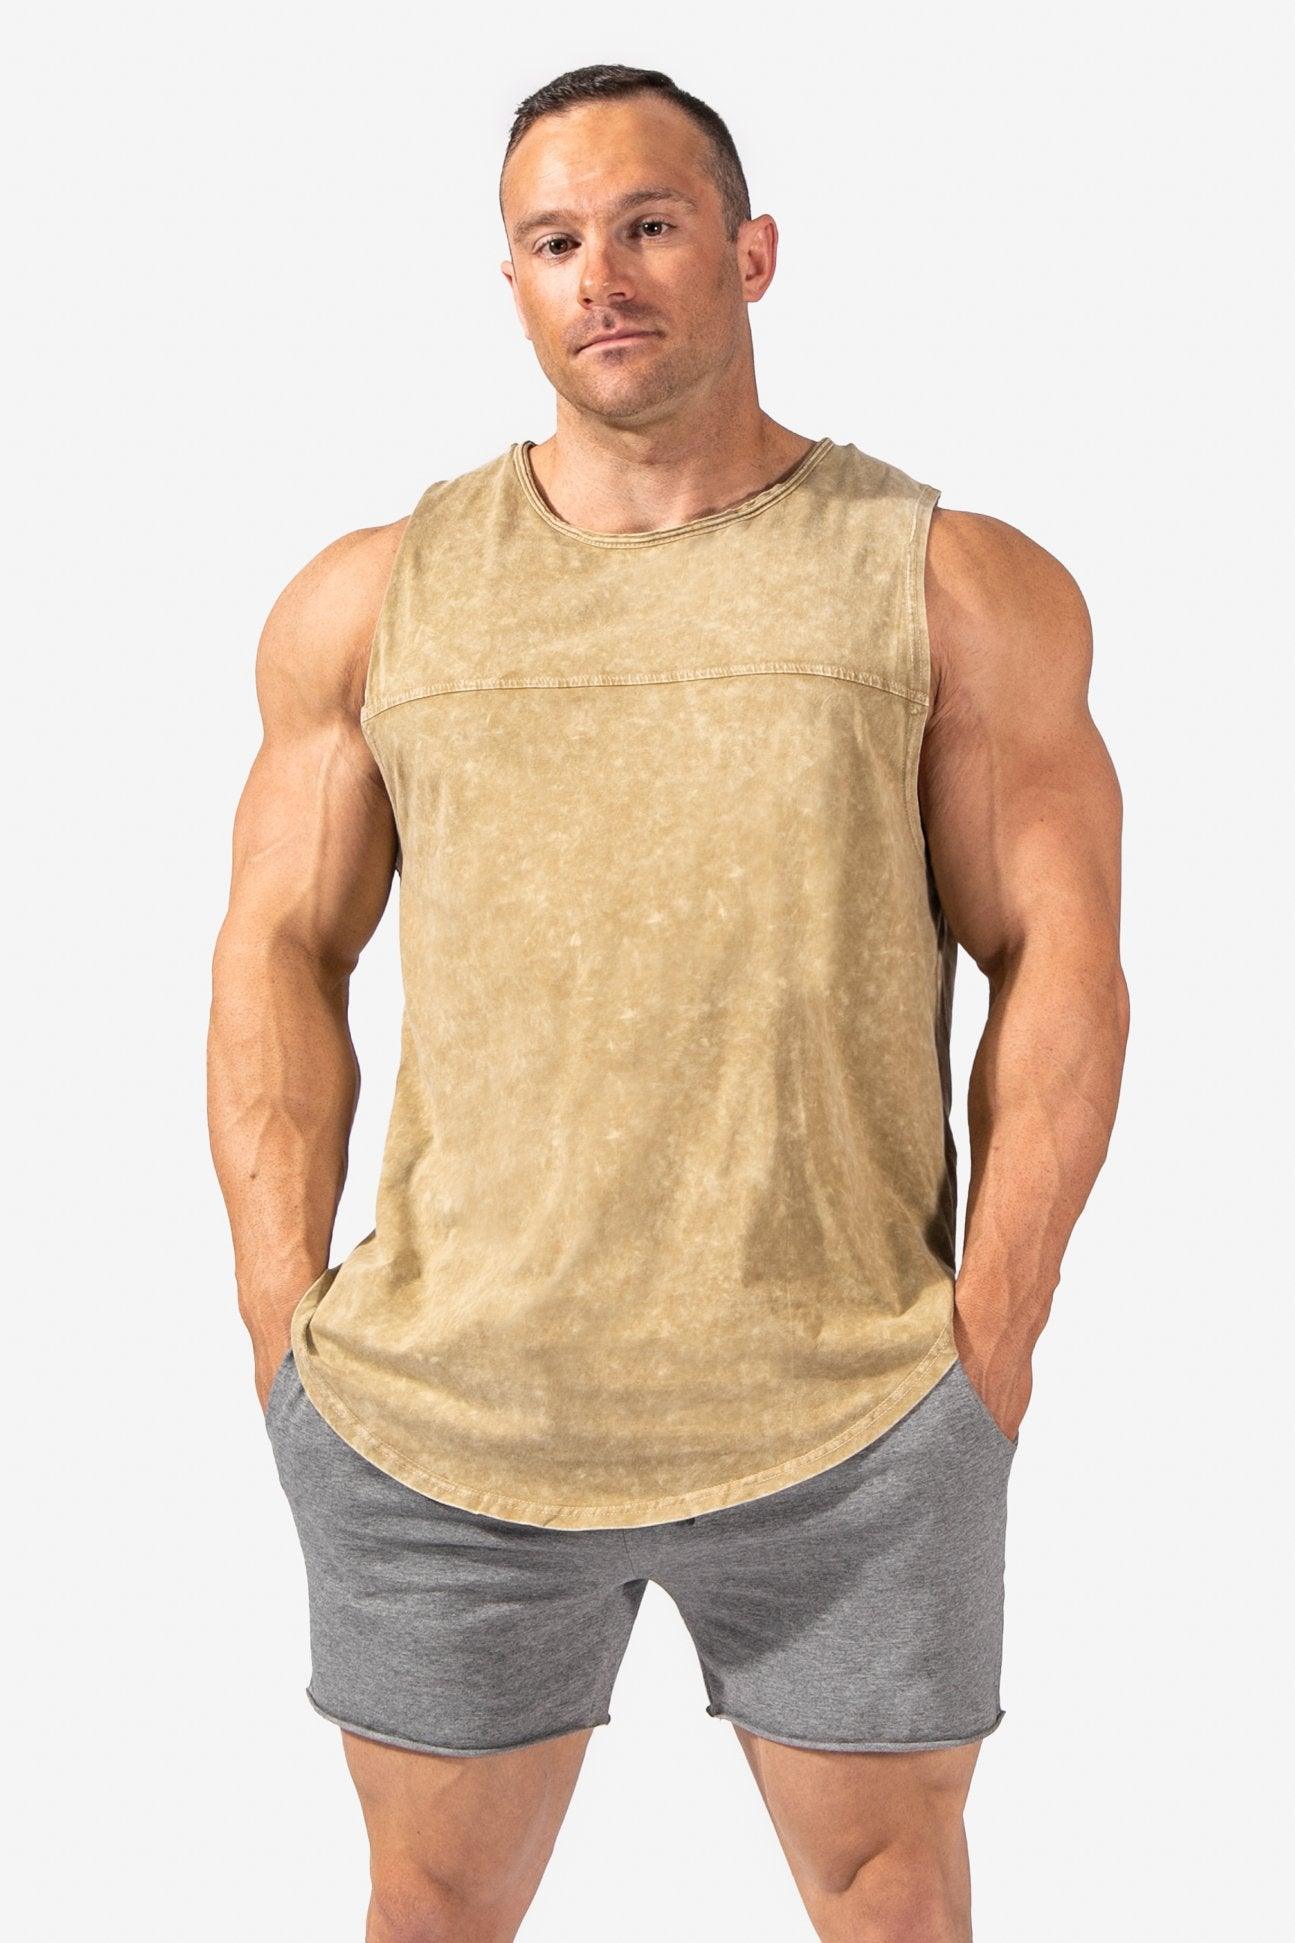 Just Gym Wear Muscle Guys Clothing Mens Loose Open Side Tank Tops